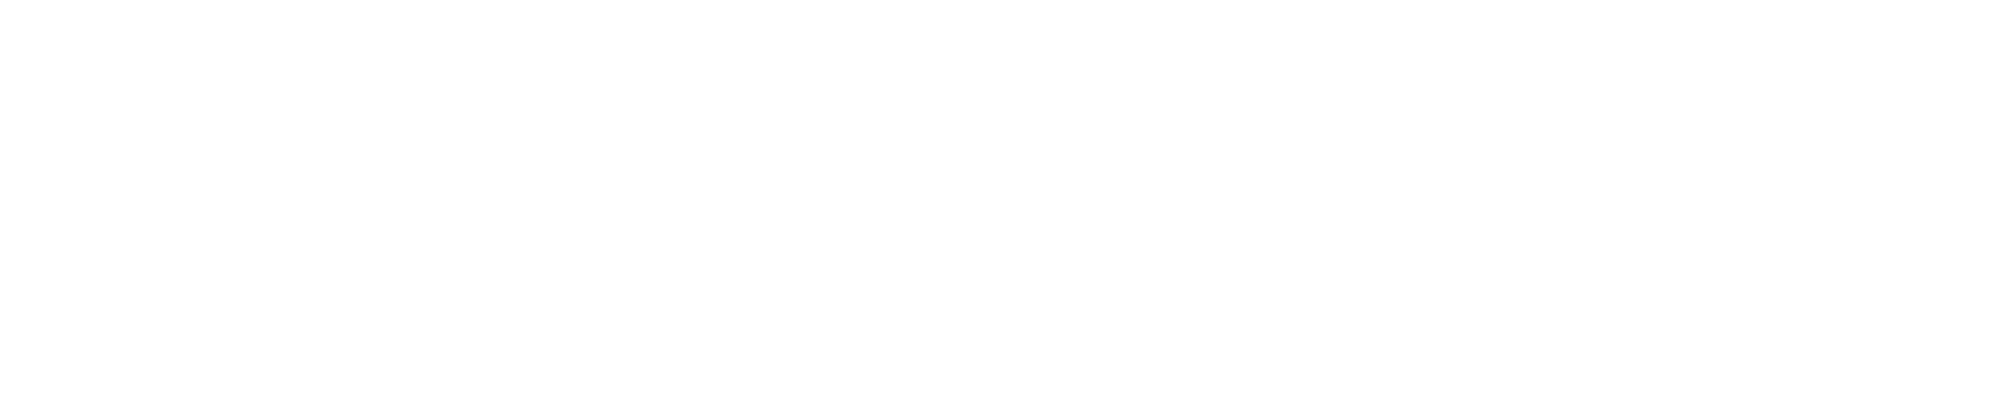 Livecycle Logo